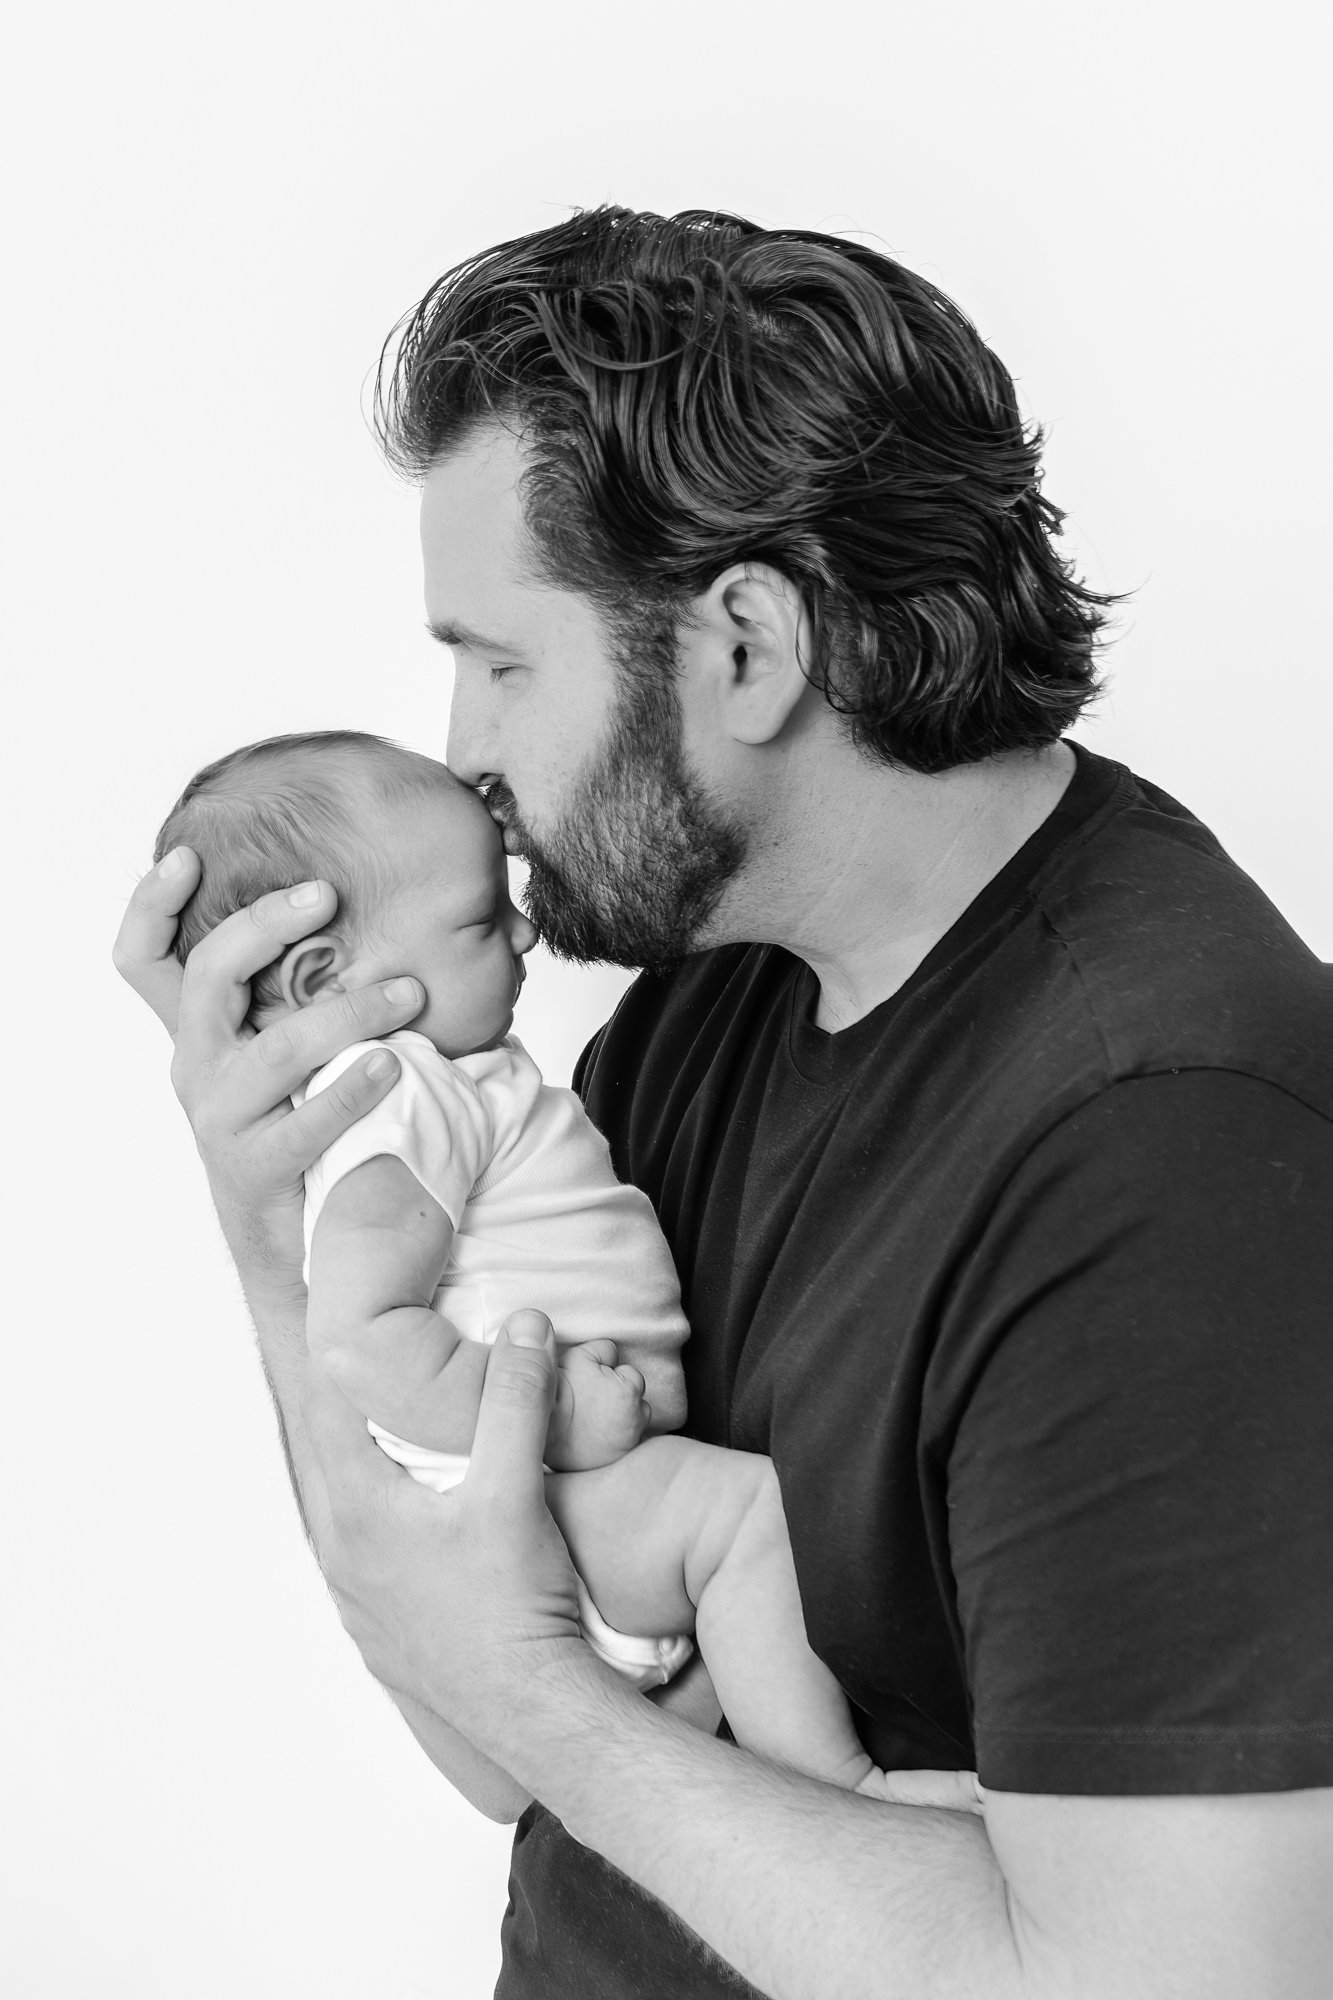  A dad cradles his newborn while giving the baby a kiss on their forehead. Dad and baby connect in a loving, timeless moment during newborn studio session by Nicole Hawkins Photography. Photography session in New Jersey. #newbornportraits #newbornstu